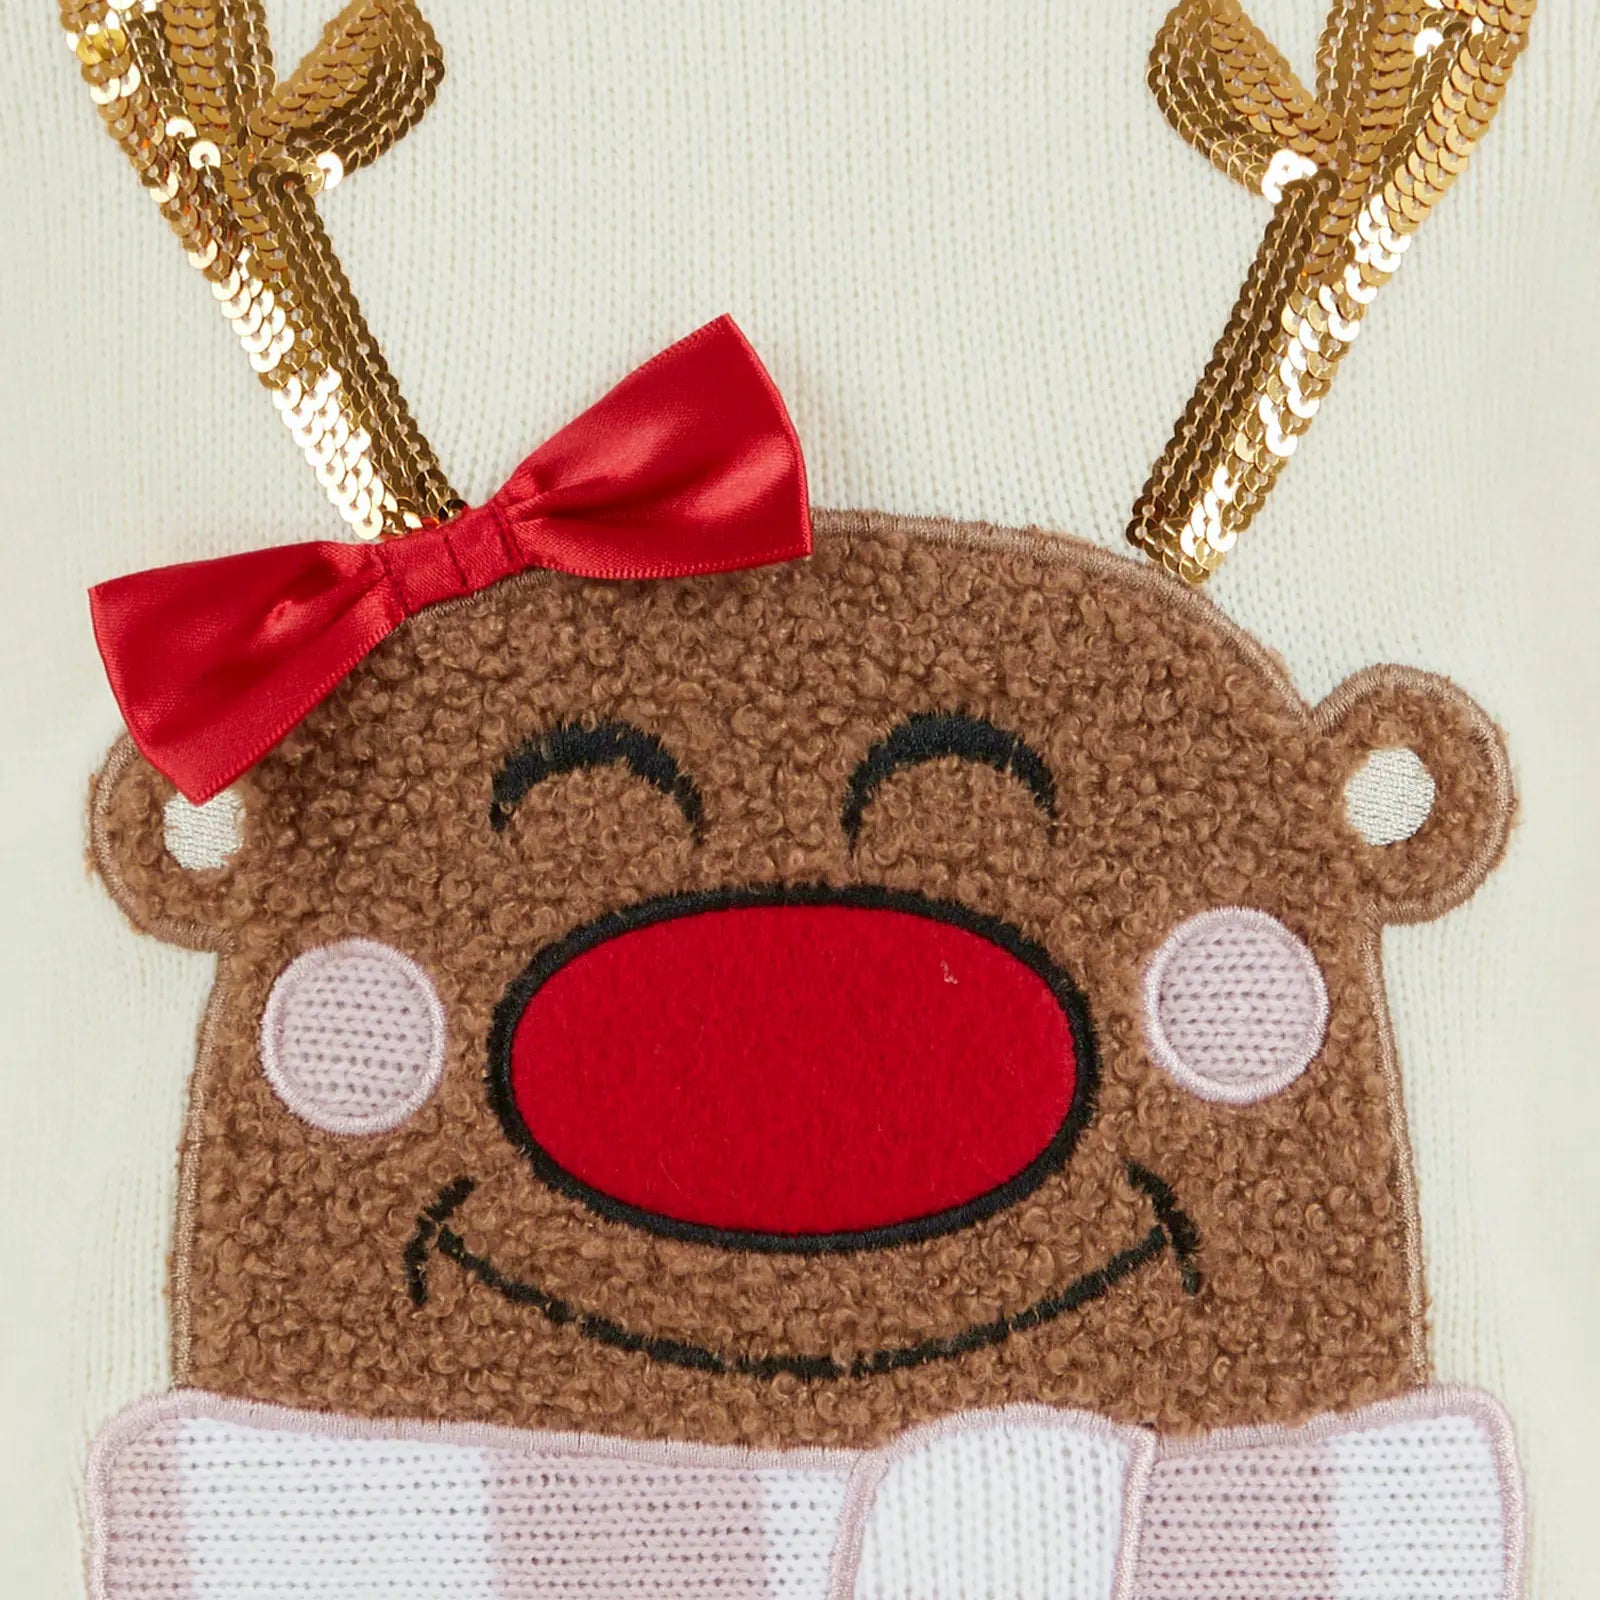 detail shot of reindeer character face featuring 3D red satin bow, gold sequin antlers and large embroided red nose